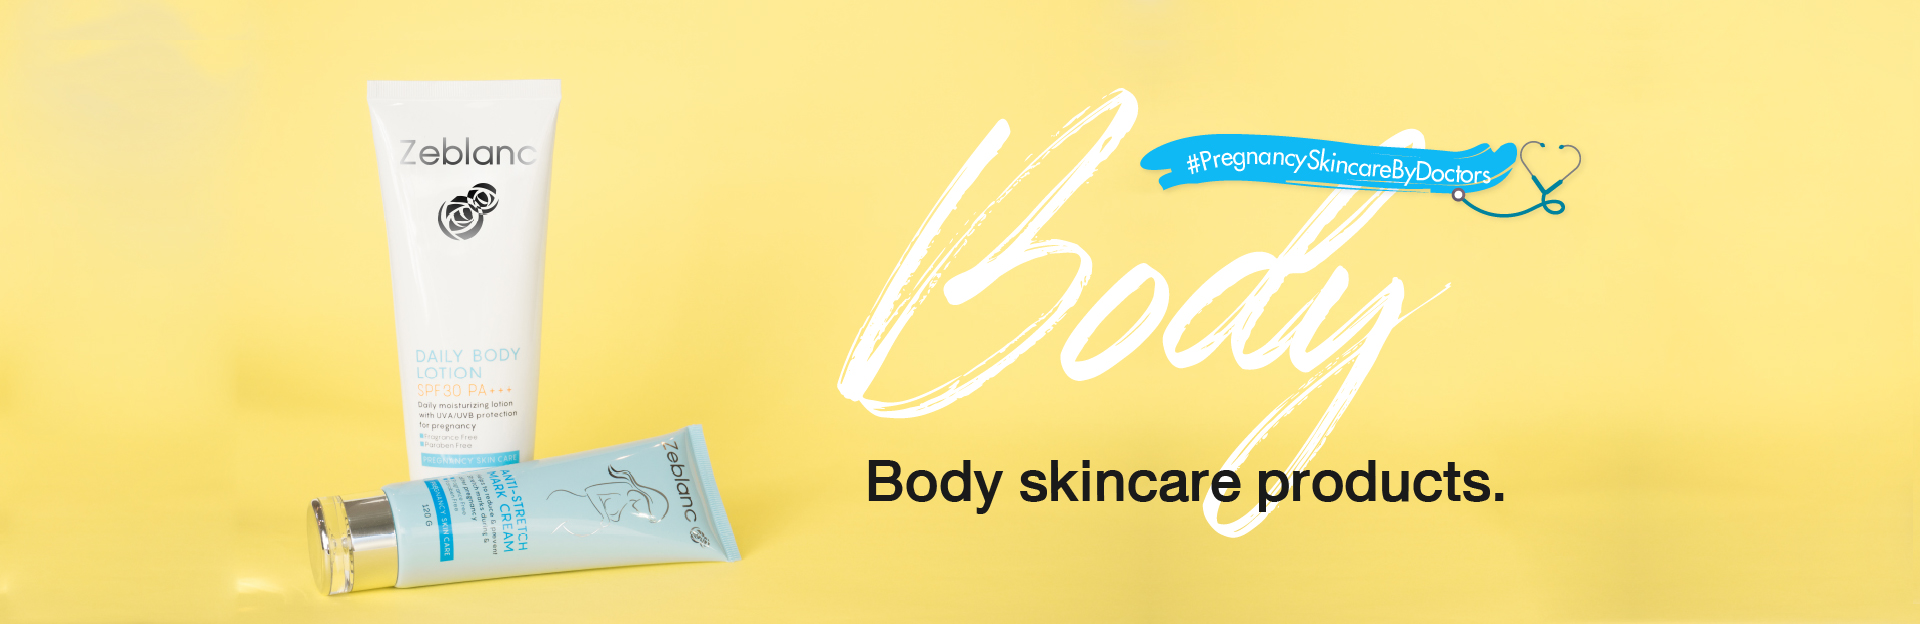 Body skincare product